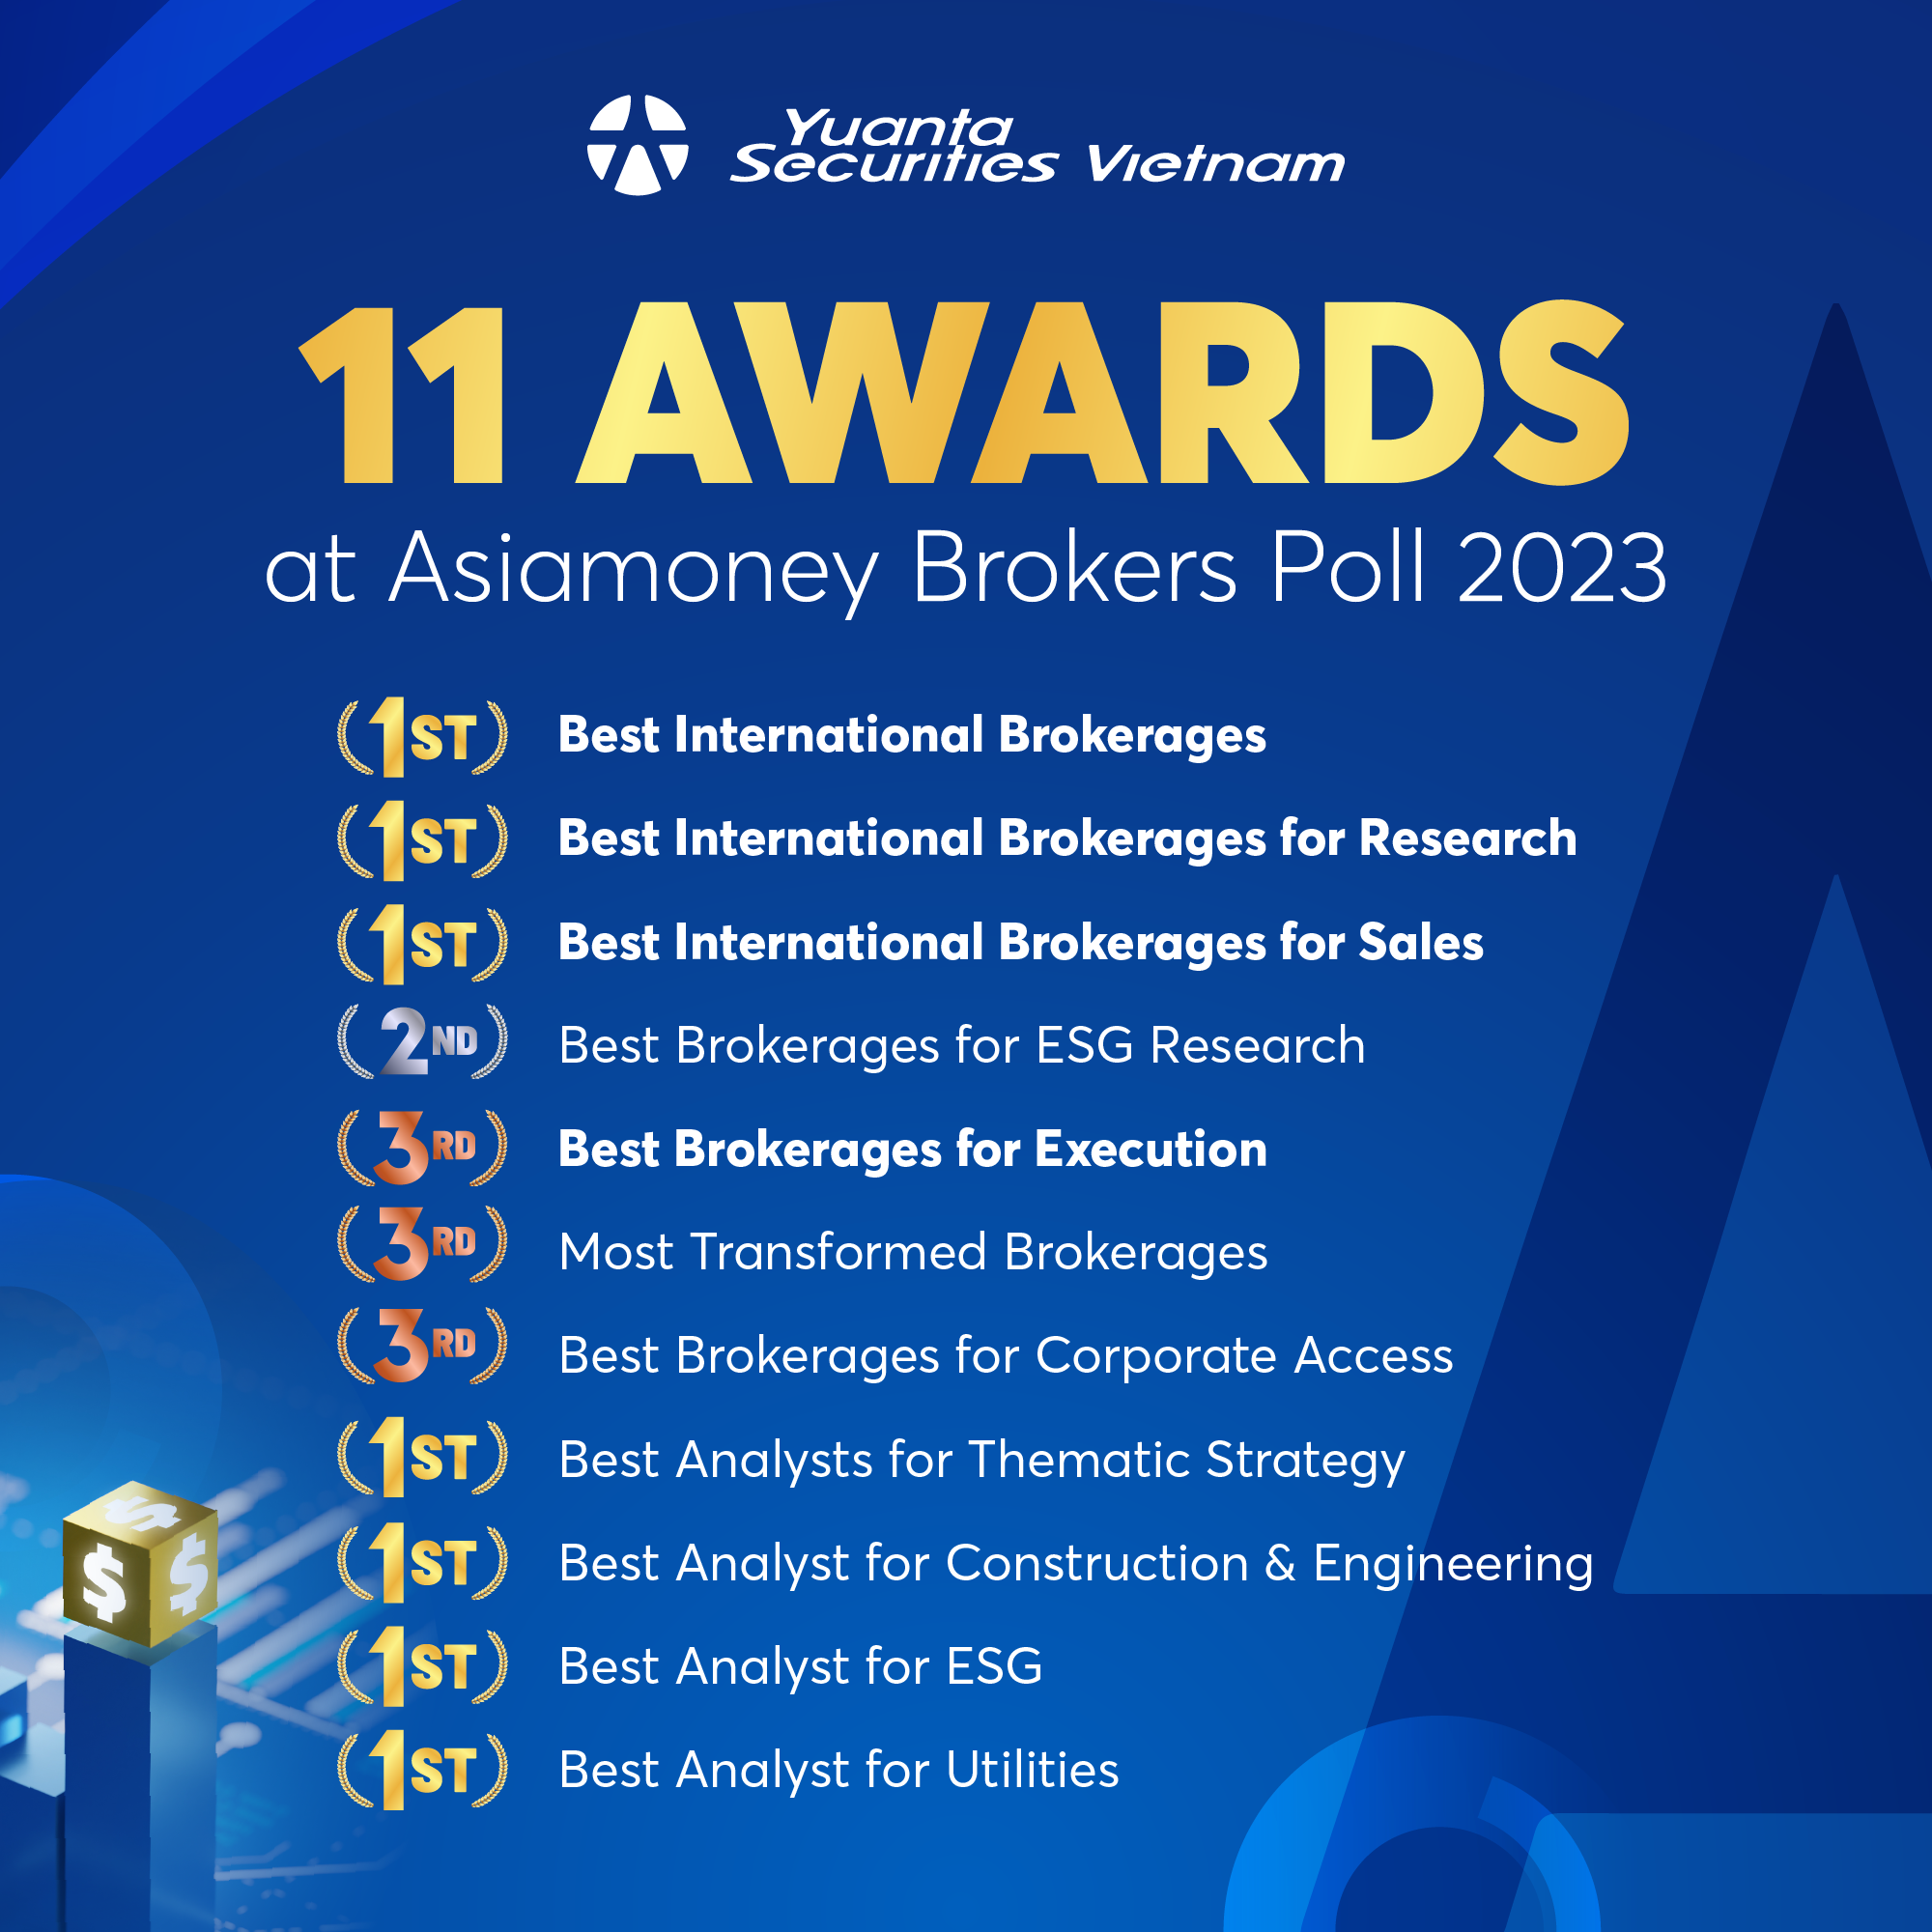 Yuanta Securities Vietnam is honored to receive 11 awards at Asiamoney Brokers Poll 2023